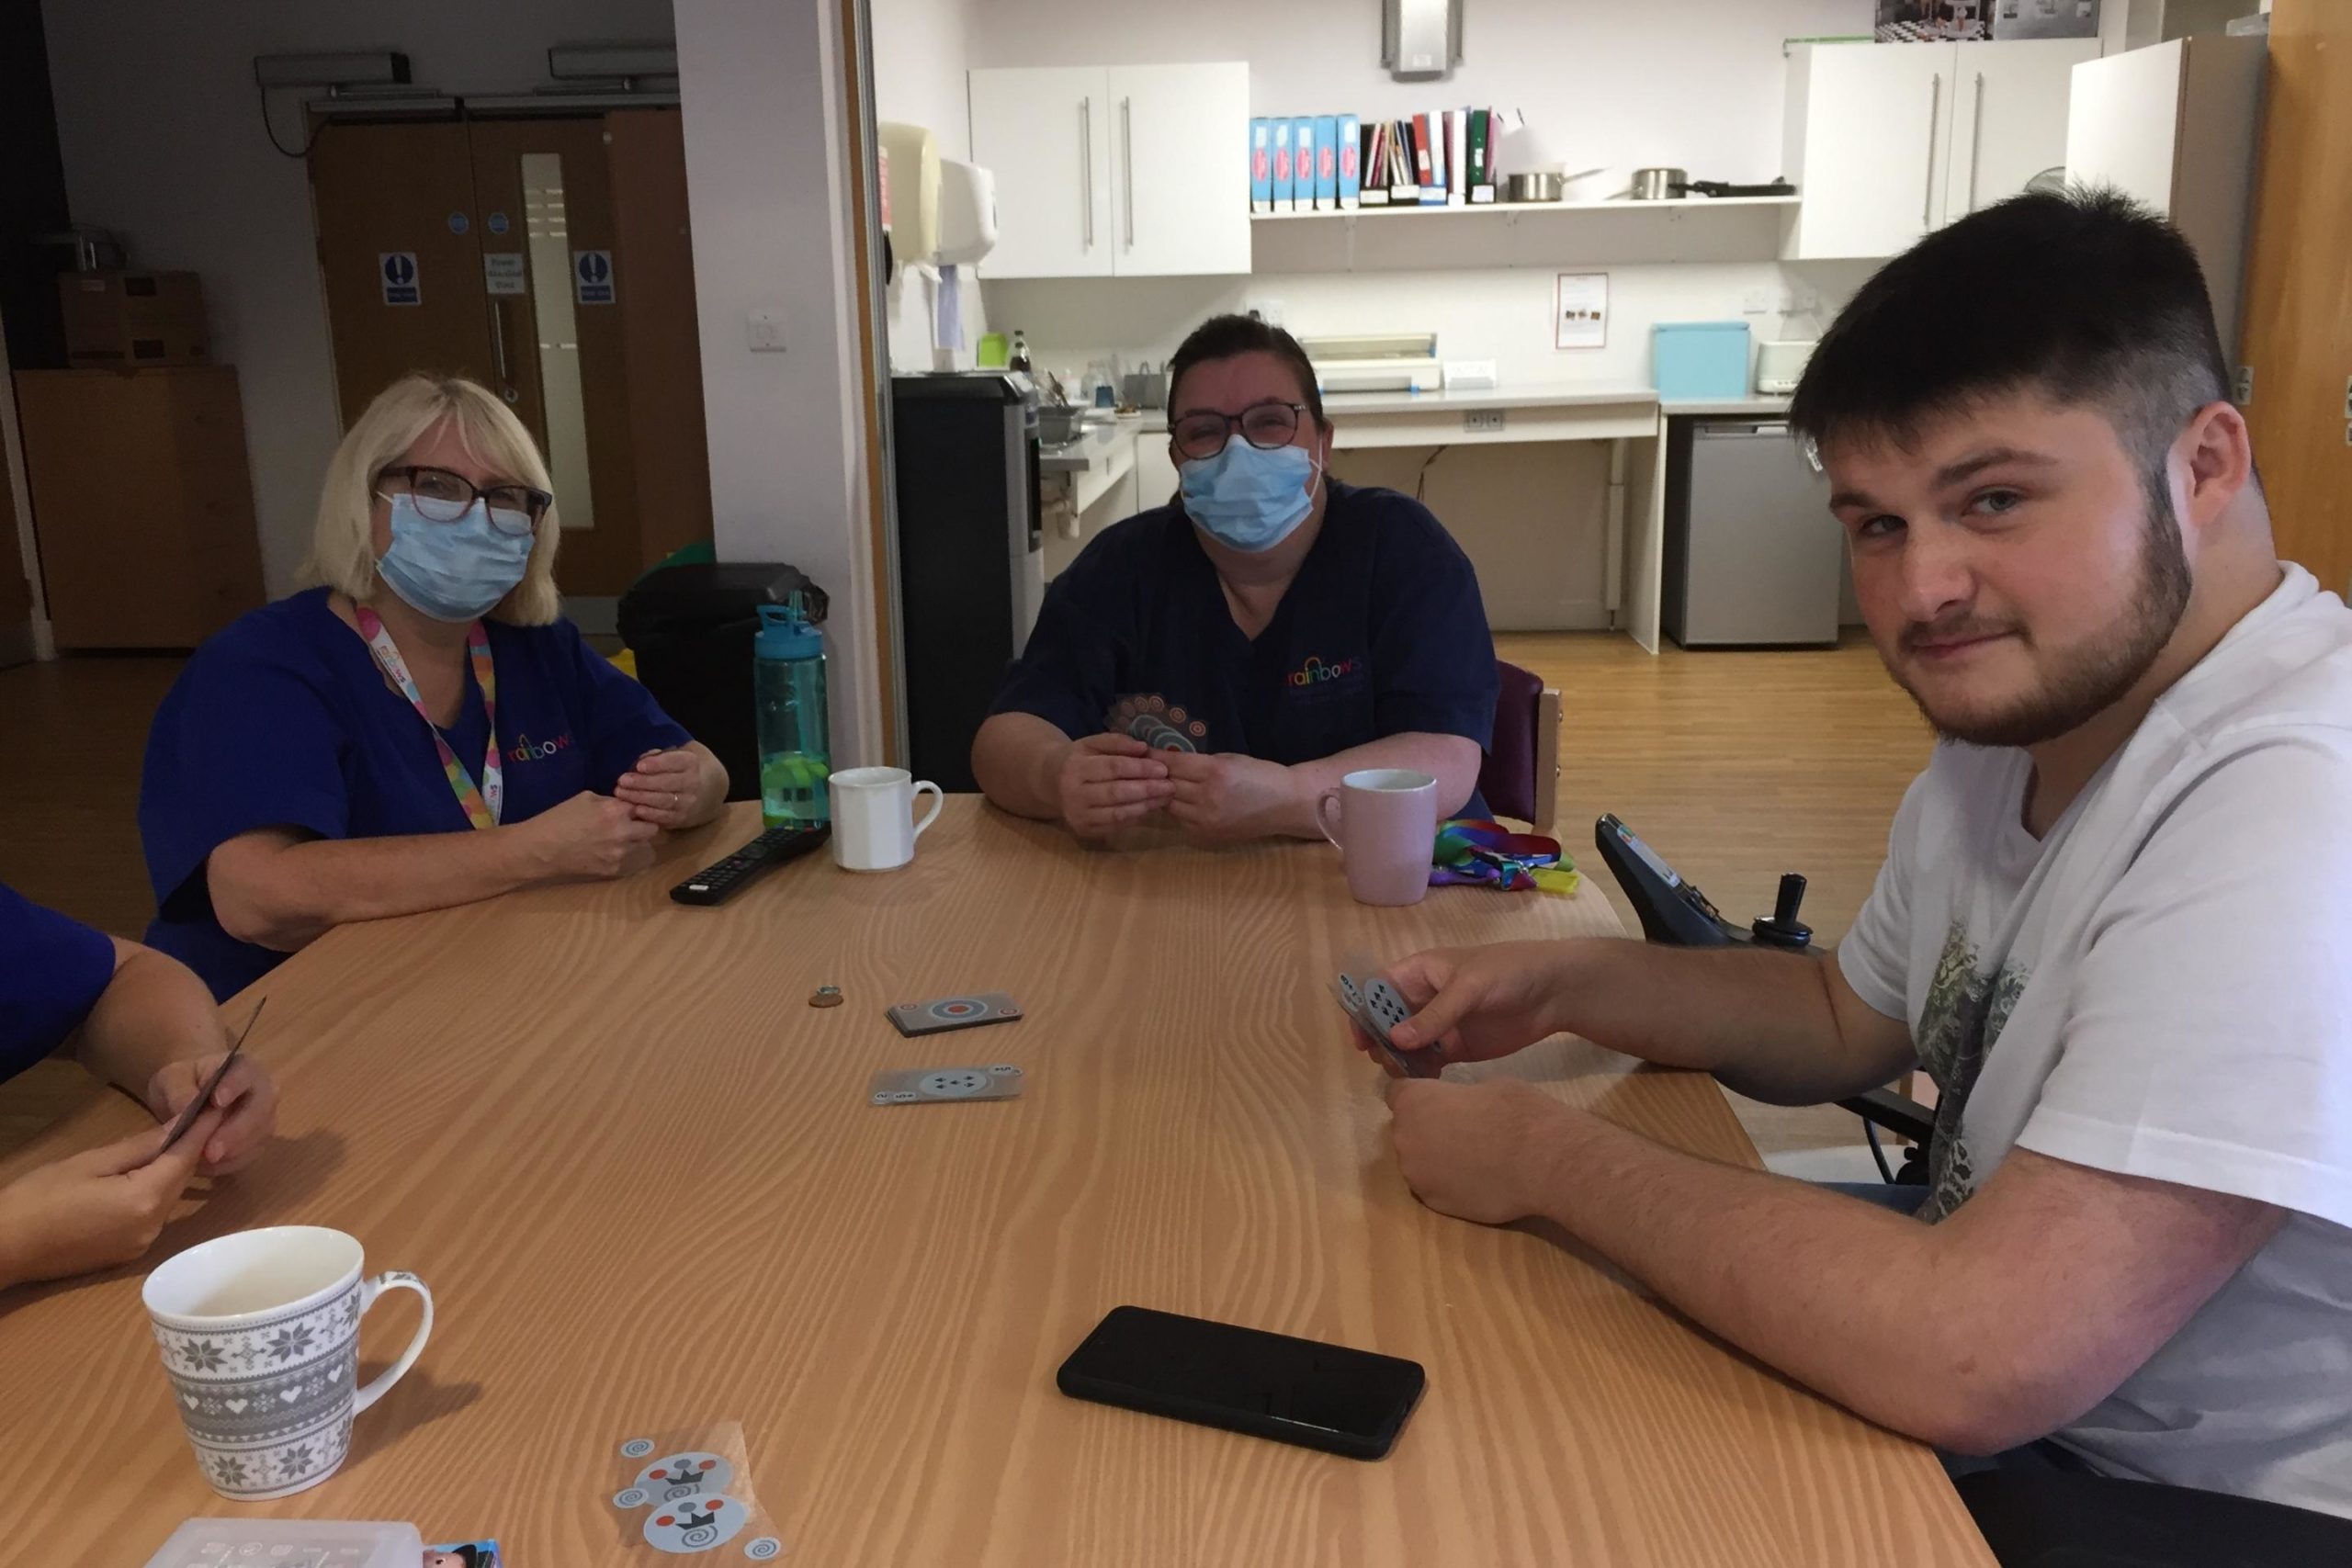 Care staff and a young man playing cards